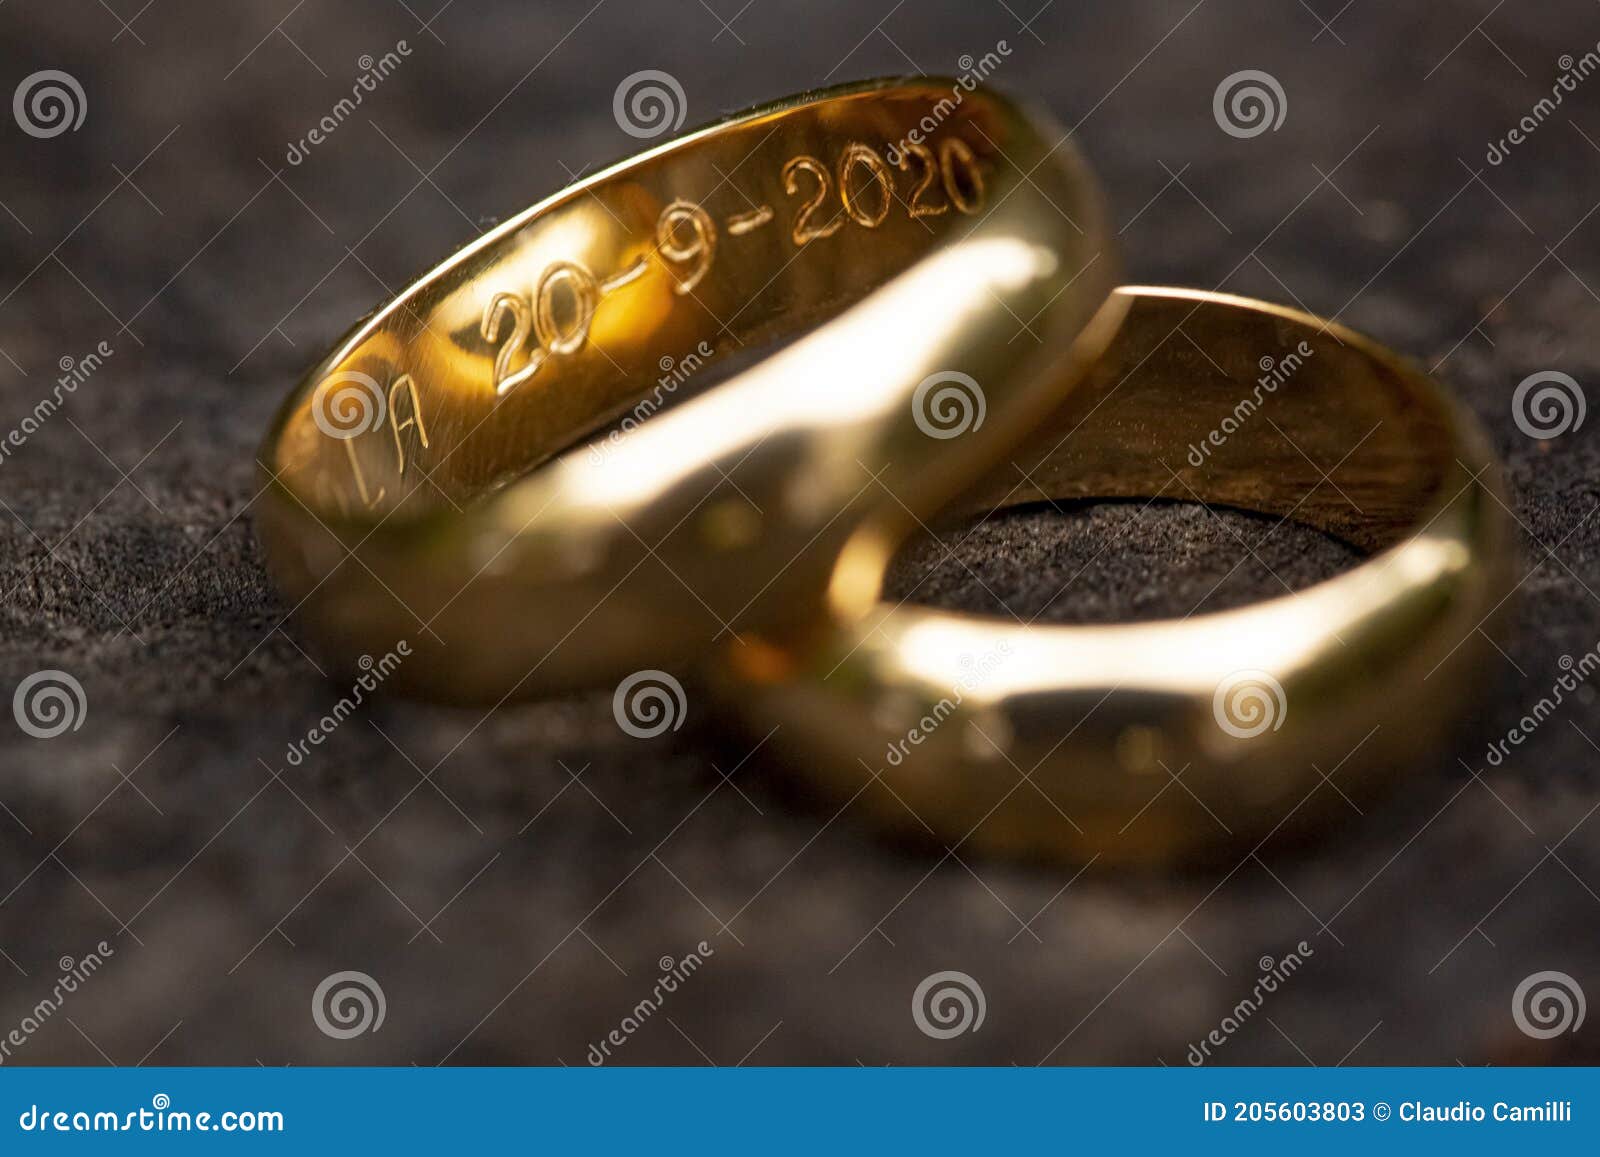 golden ring with engraved dates